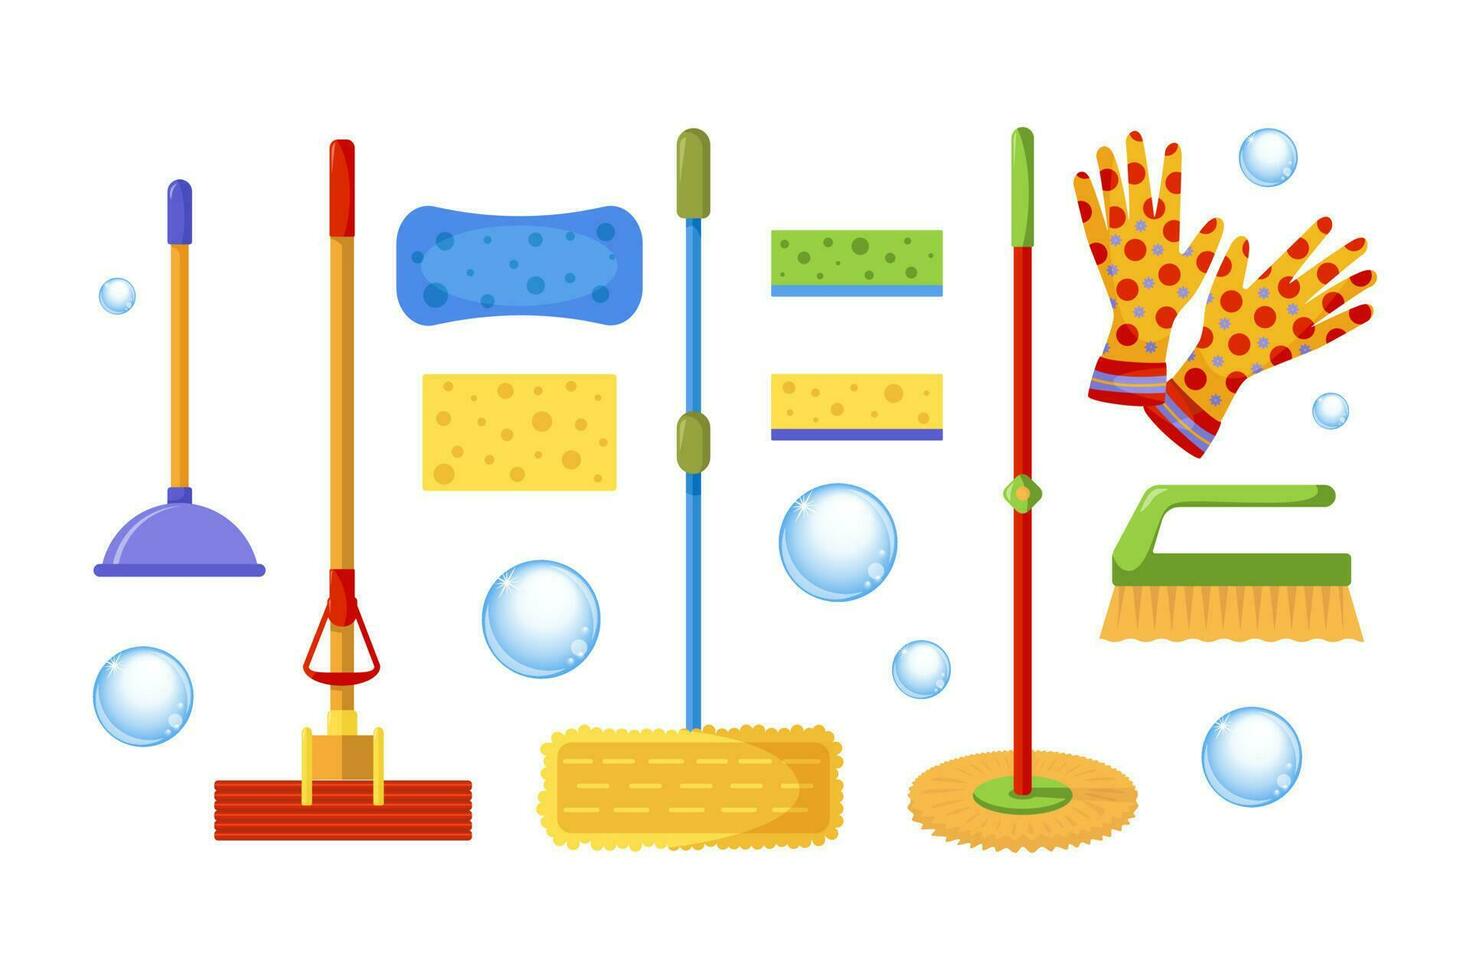 Cleaning products set for housework. Household mop, roller, self-squeezing, sponges for washing dishes, plunger, brush, household gloves. Household tools for cleaning house and office. Vector